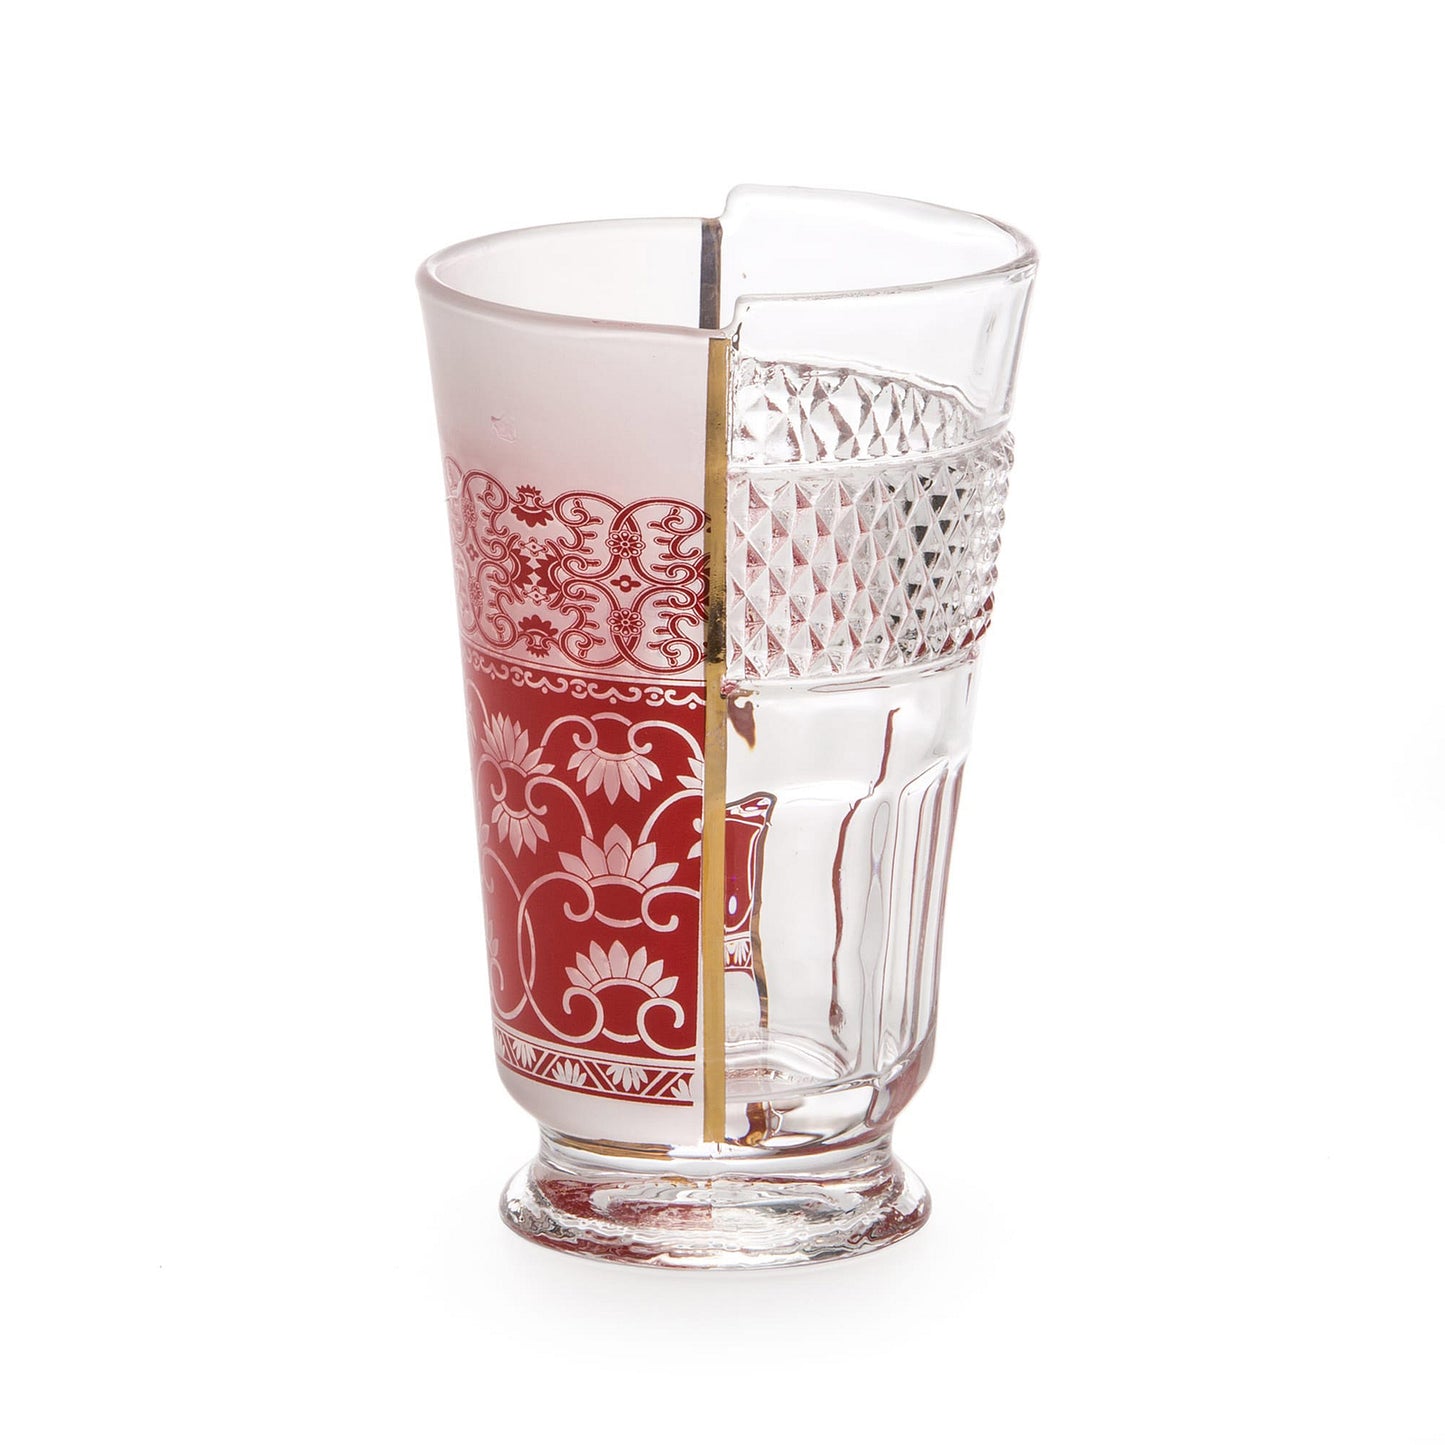 Seletti Clarice Cocktail Glasses - Set of 3